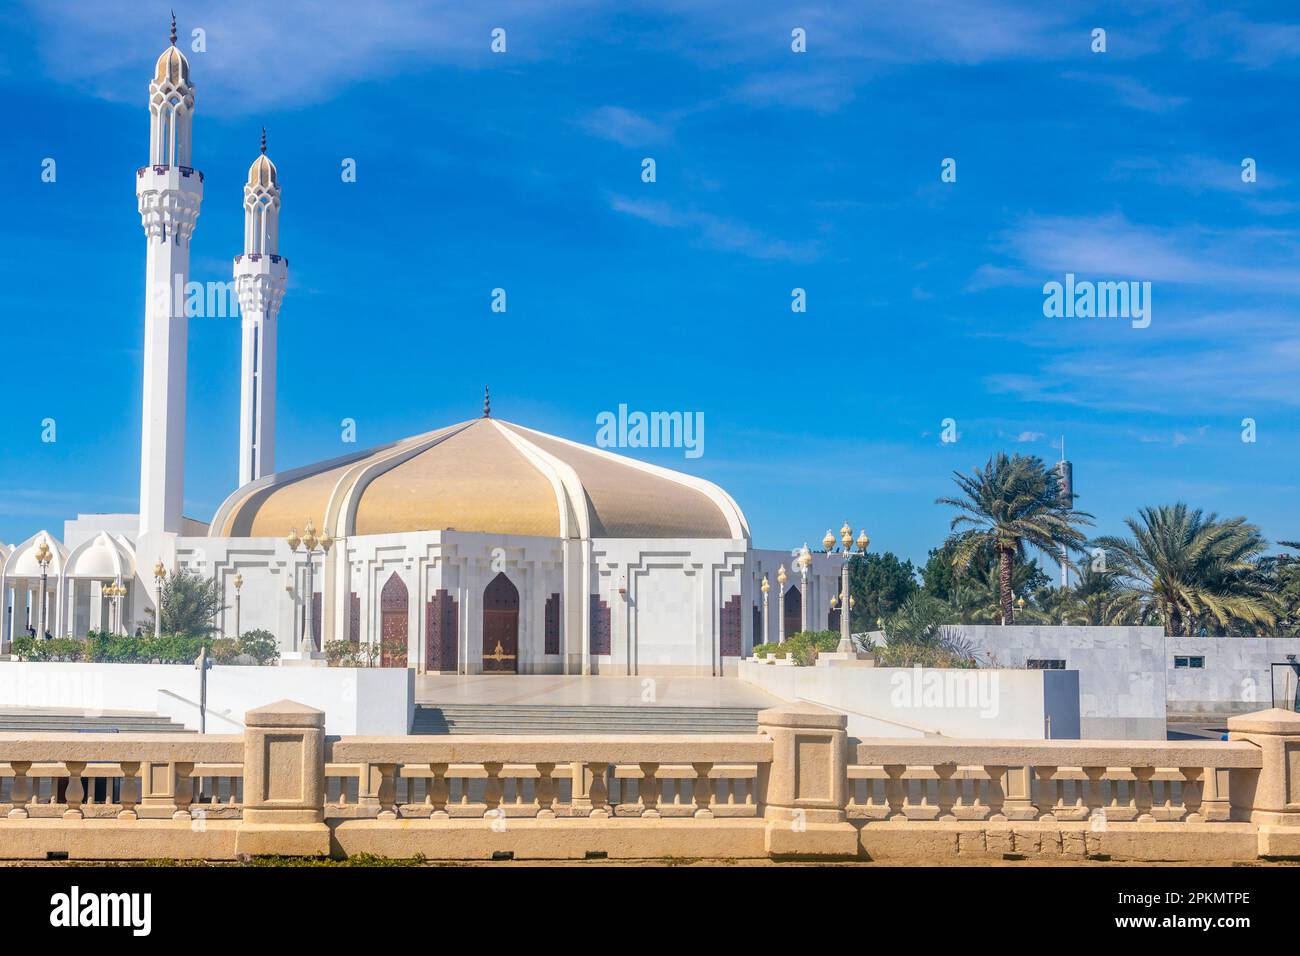 Hassan Enany golden domed mosque with palms in foreground, Jeddah, Saudi Arabia Stock Photo